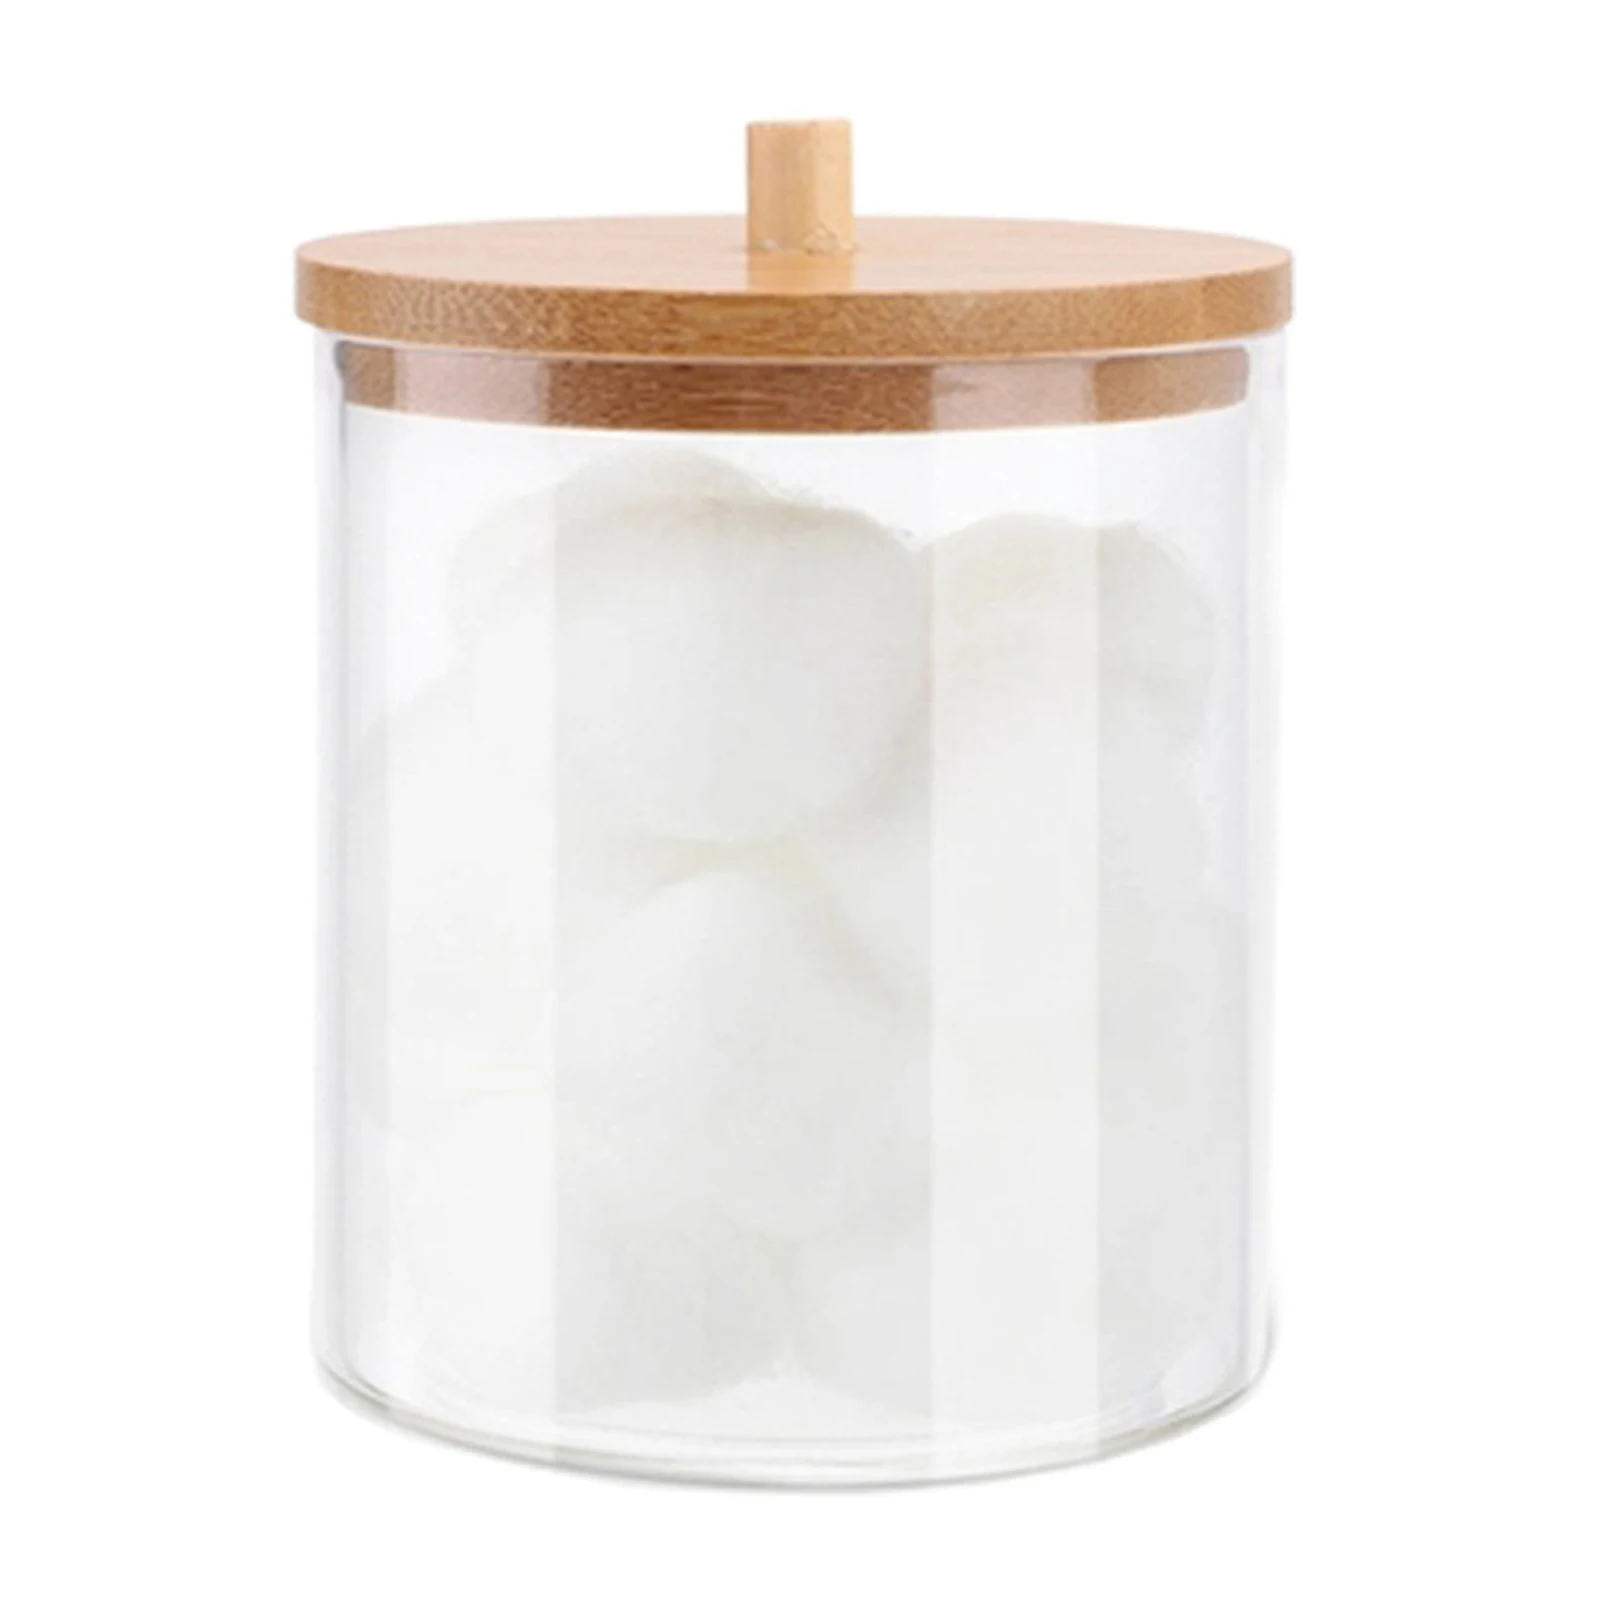 Acrylic Makeup Cotton Swabs Holder with Bamboo Lids Transparent Cosmetics Cotton Pads Organizer Bathroom Cotton Pads Container